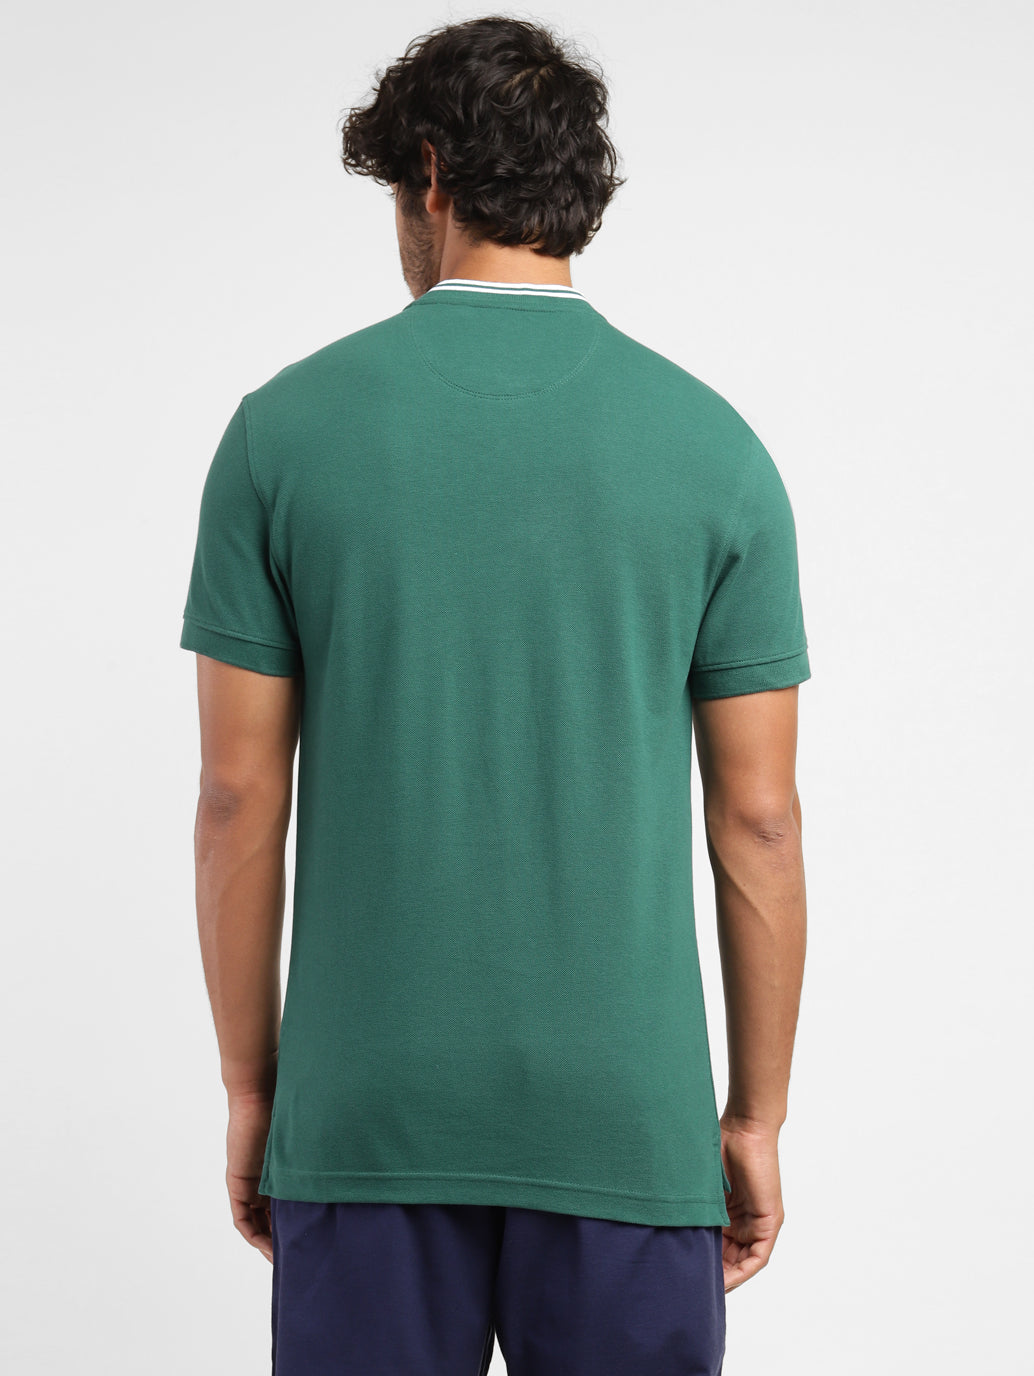 Men's Solid Band Neck T-shirt Green